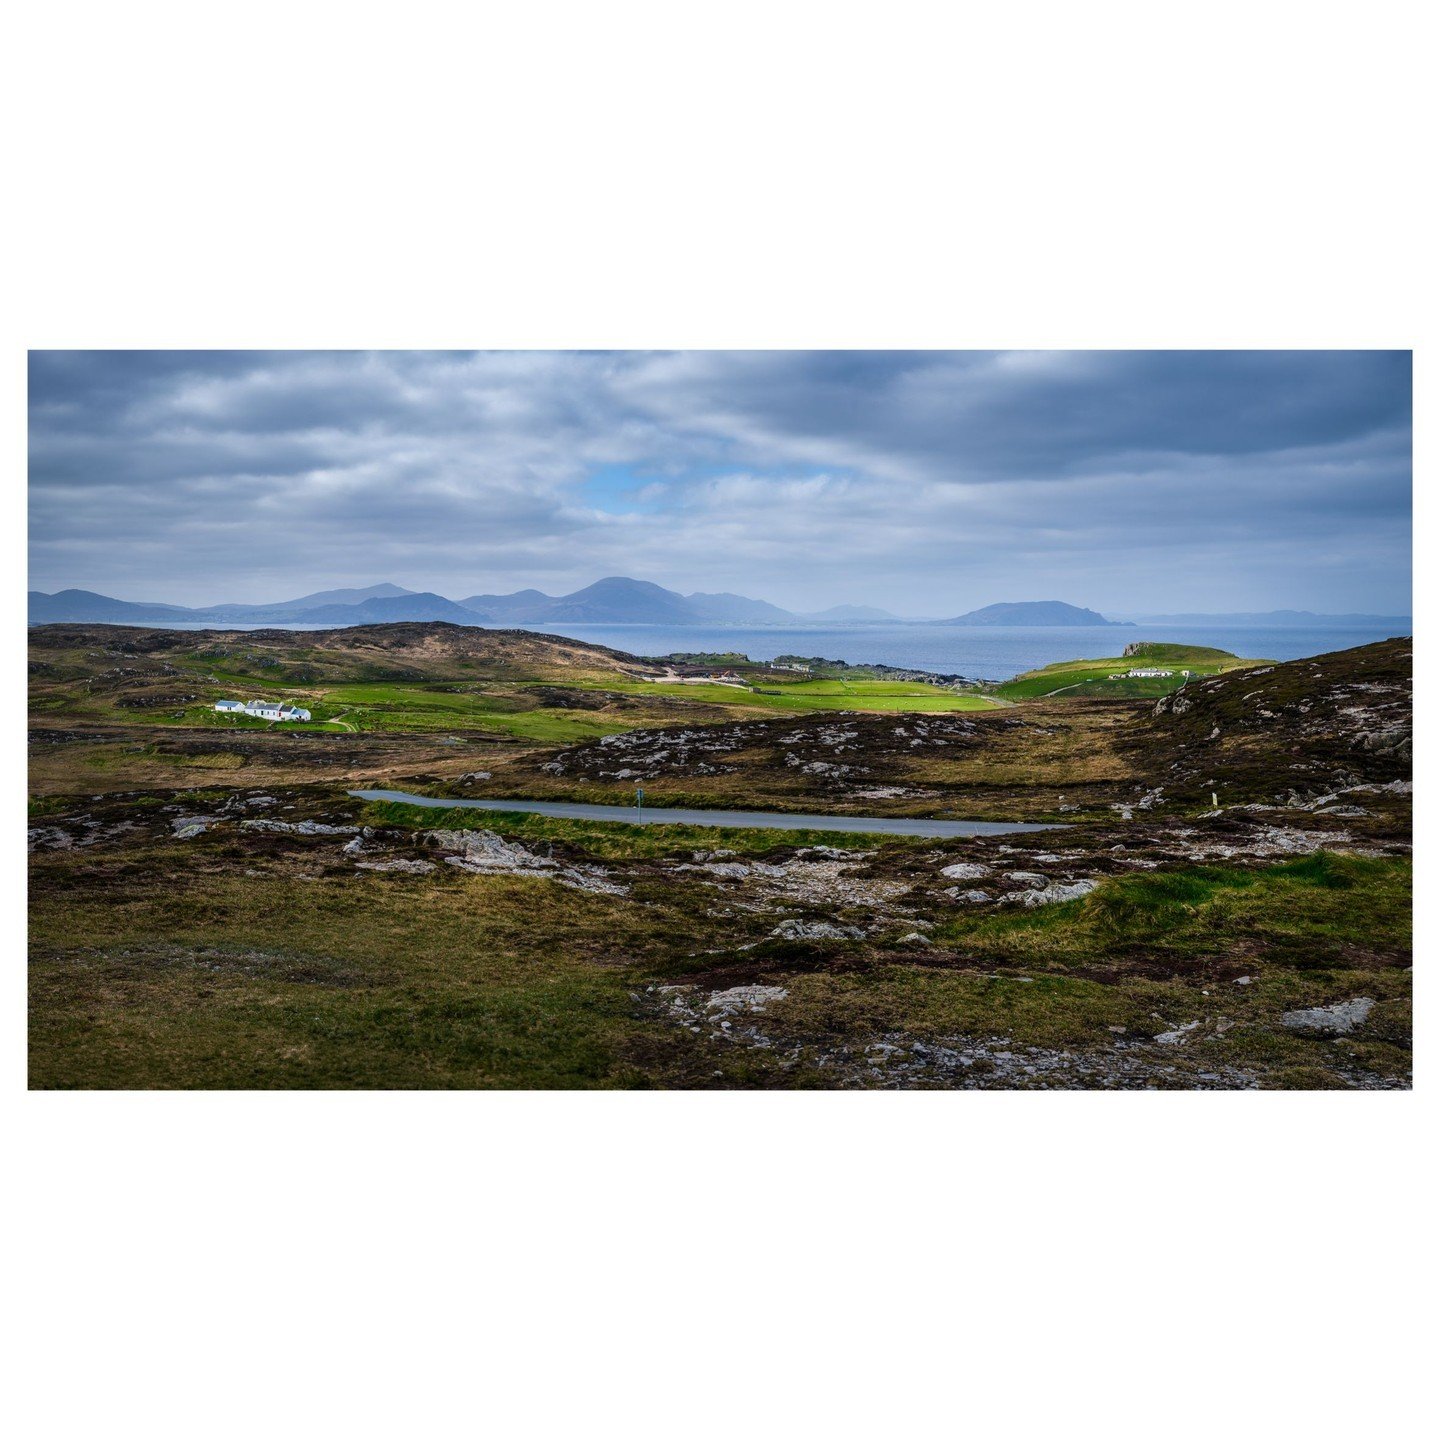 Panorama of Malin Head, looking back down the Inishowen peninsula in Co. Donegal. What a magical and stunning place. 

#wildatlanticway #Ireland #donegal #loveireland #discoverireland